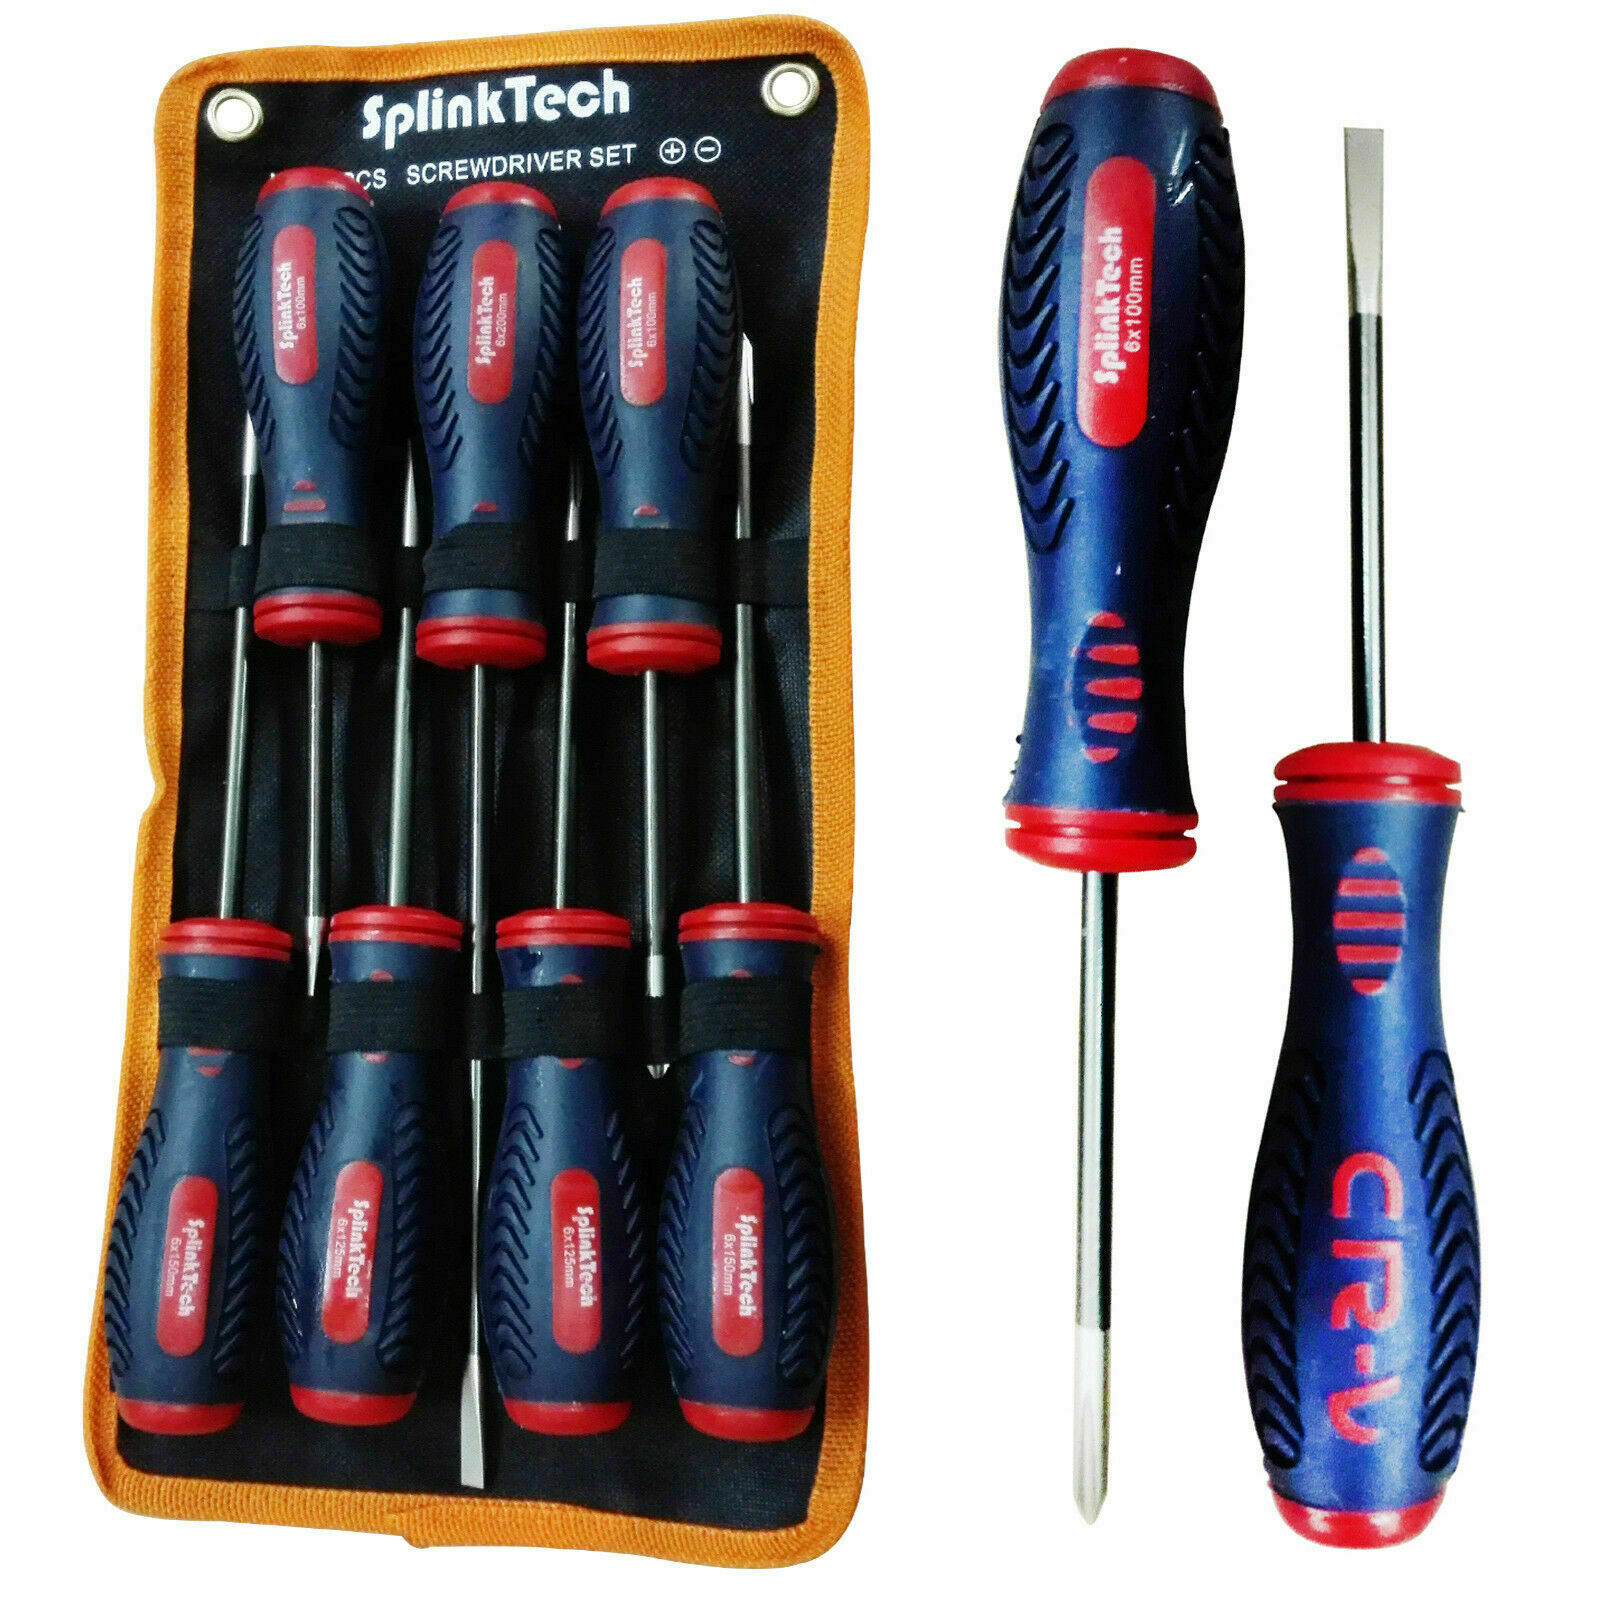 7pcs Screwdriver Precision Electrician Hex Philips Slotted Magnetic Tips Screwdriver Tool Set Soft Grip Handles Tool Set